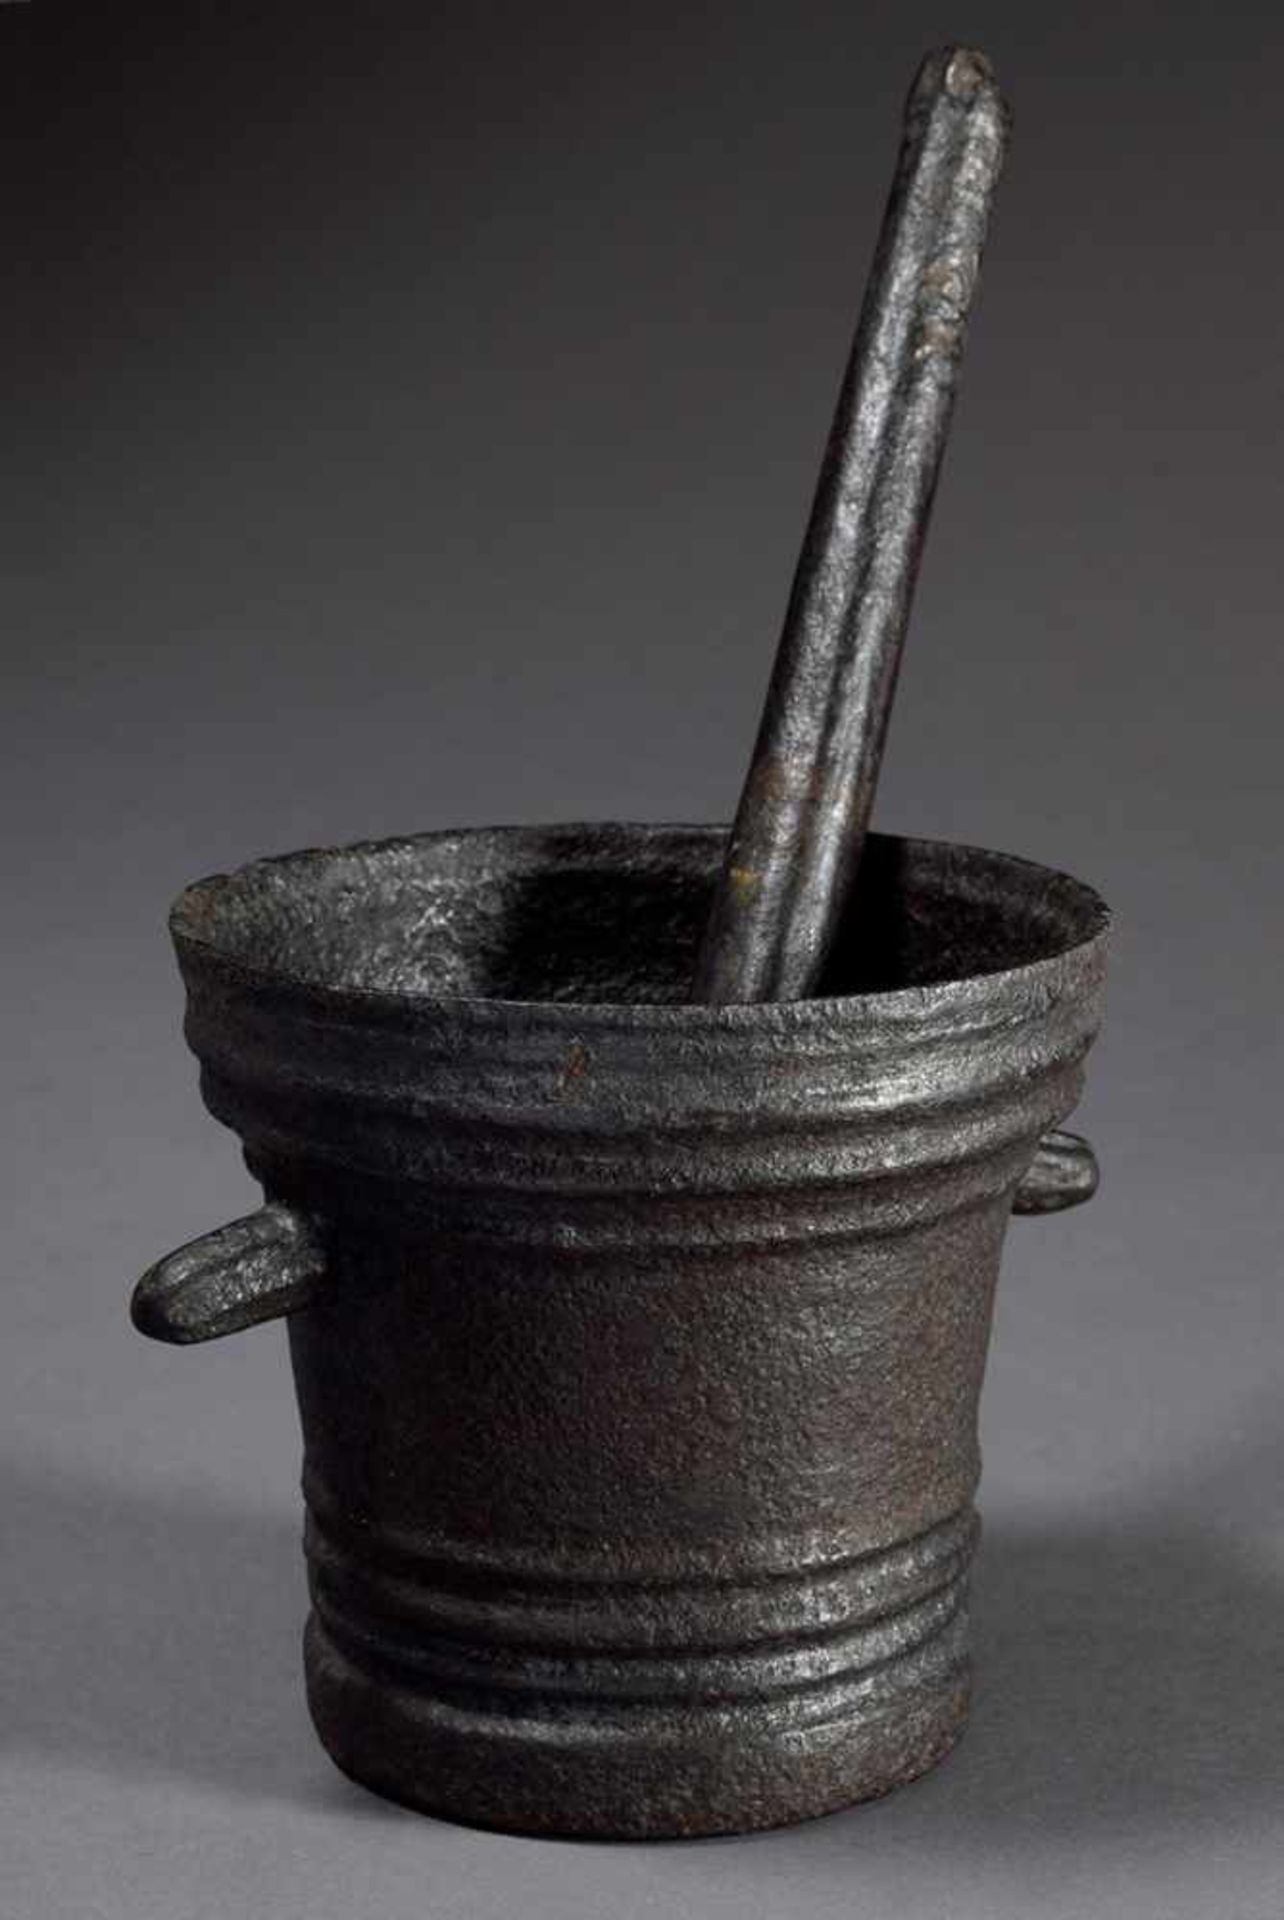 Cast-iron mortar with cylindrical body with longitudinal grooves and rod-shaped handles, probably